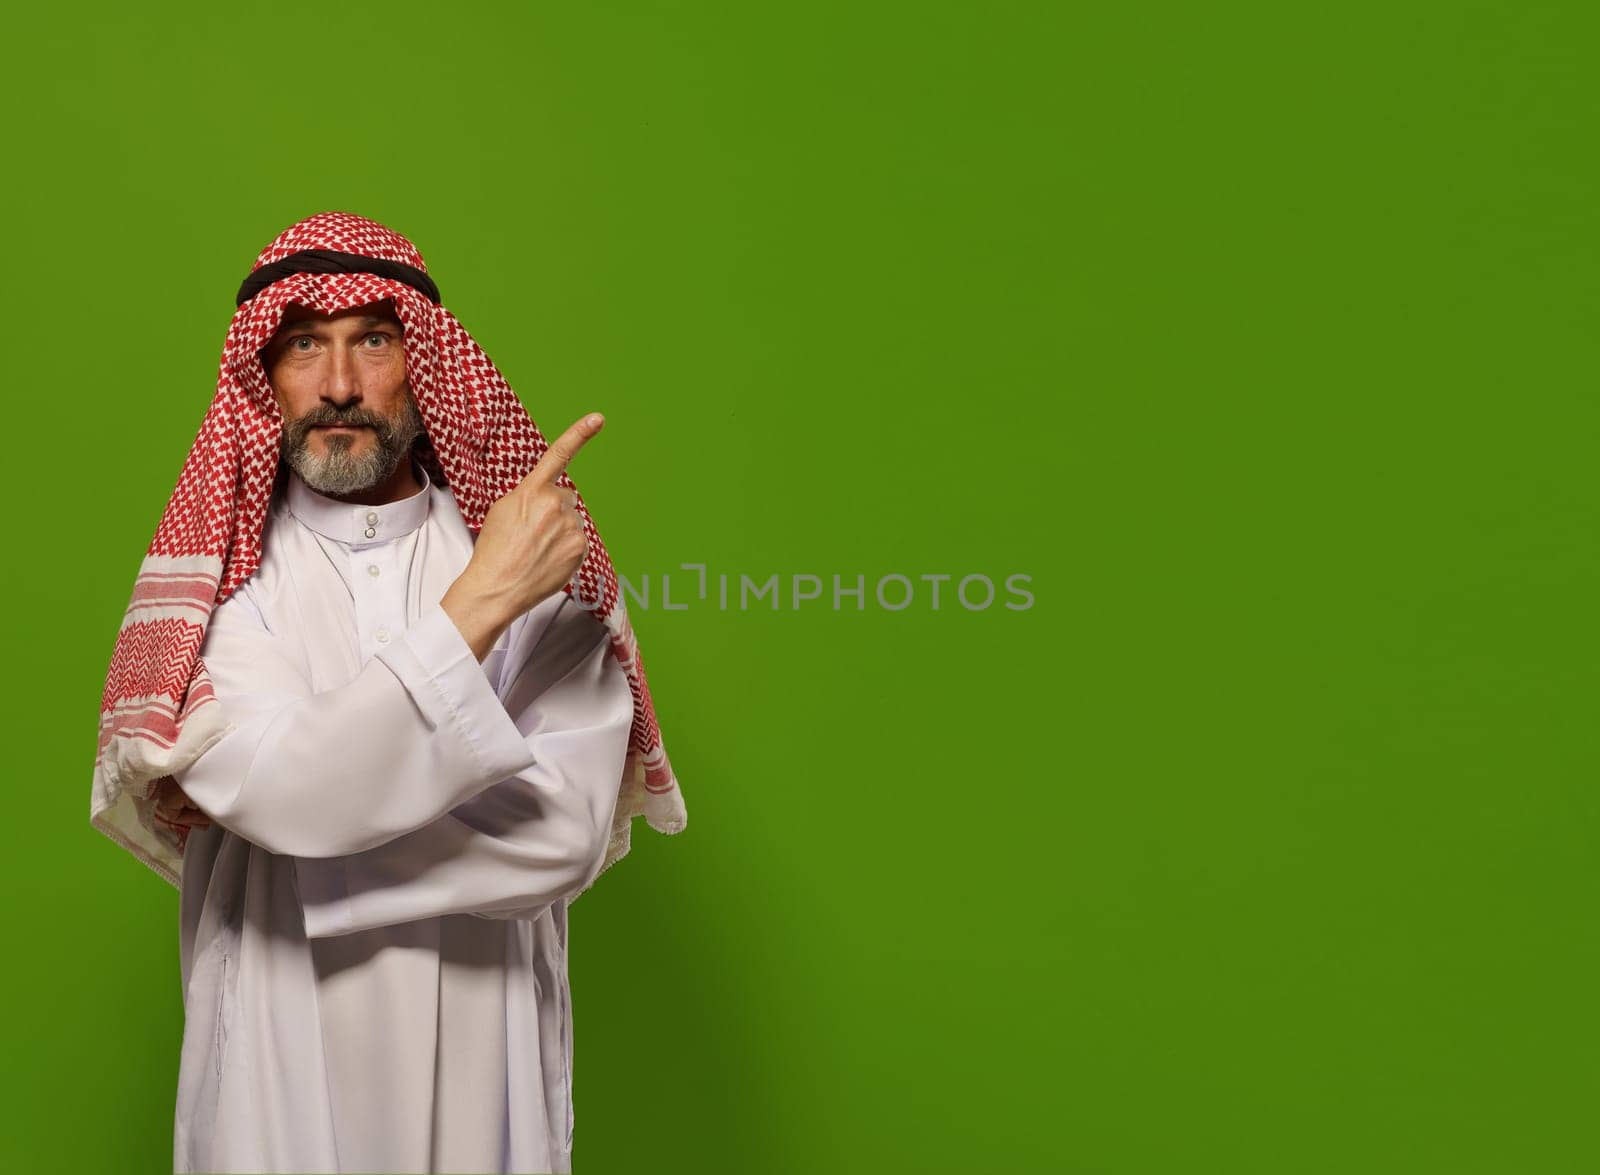 mature Muslim man in a traditional dishdasha points his finger towards copy space symbolizing concept of Sharia law, the Islamic legal system based on teachings of Quran and Hadith. authority, leadership, and principles of justice and ethics within the legal framework of Sharia law, with copy space for additional text or design elements. by LipikStockMedia